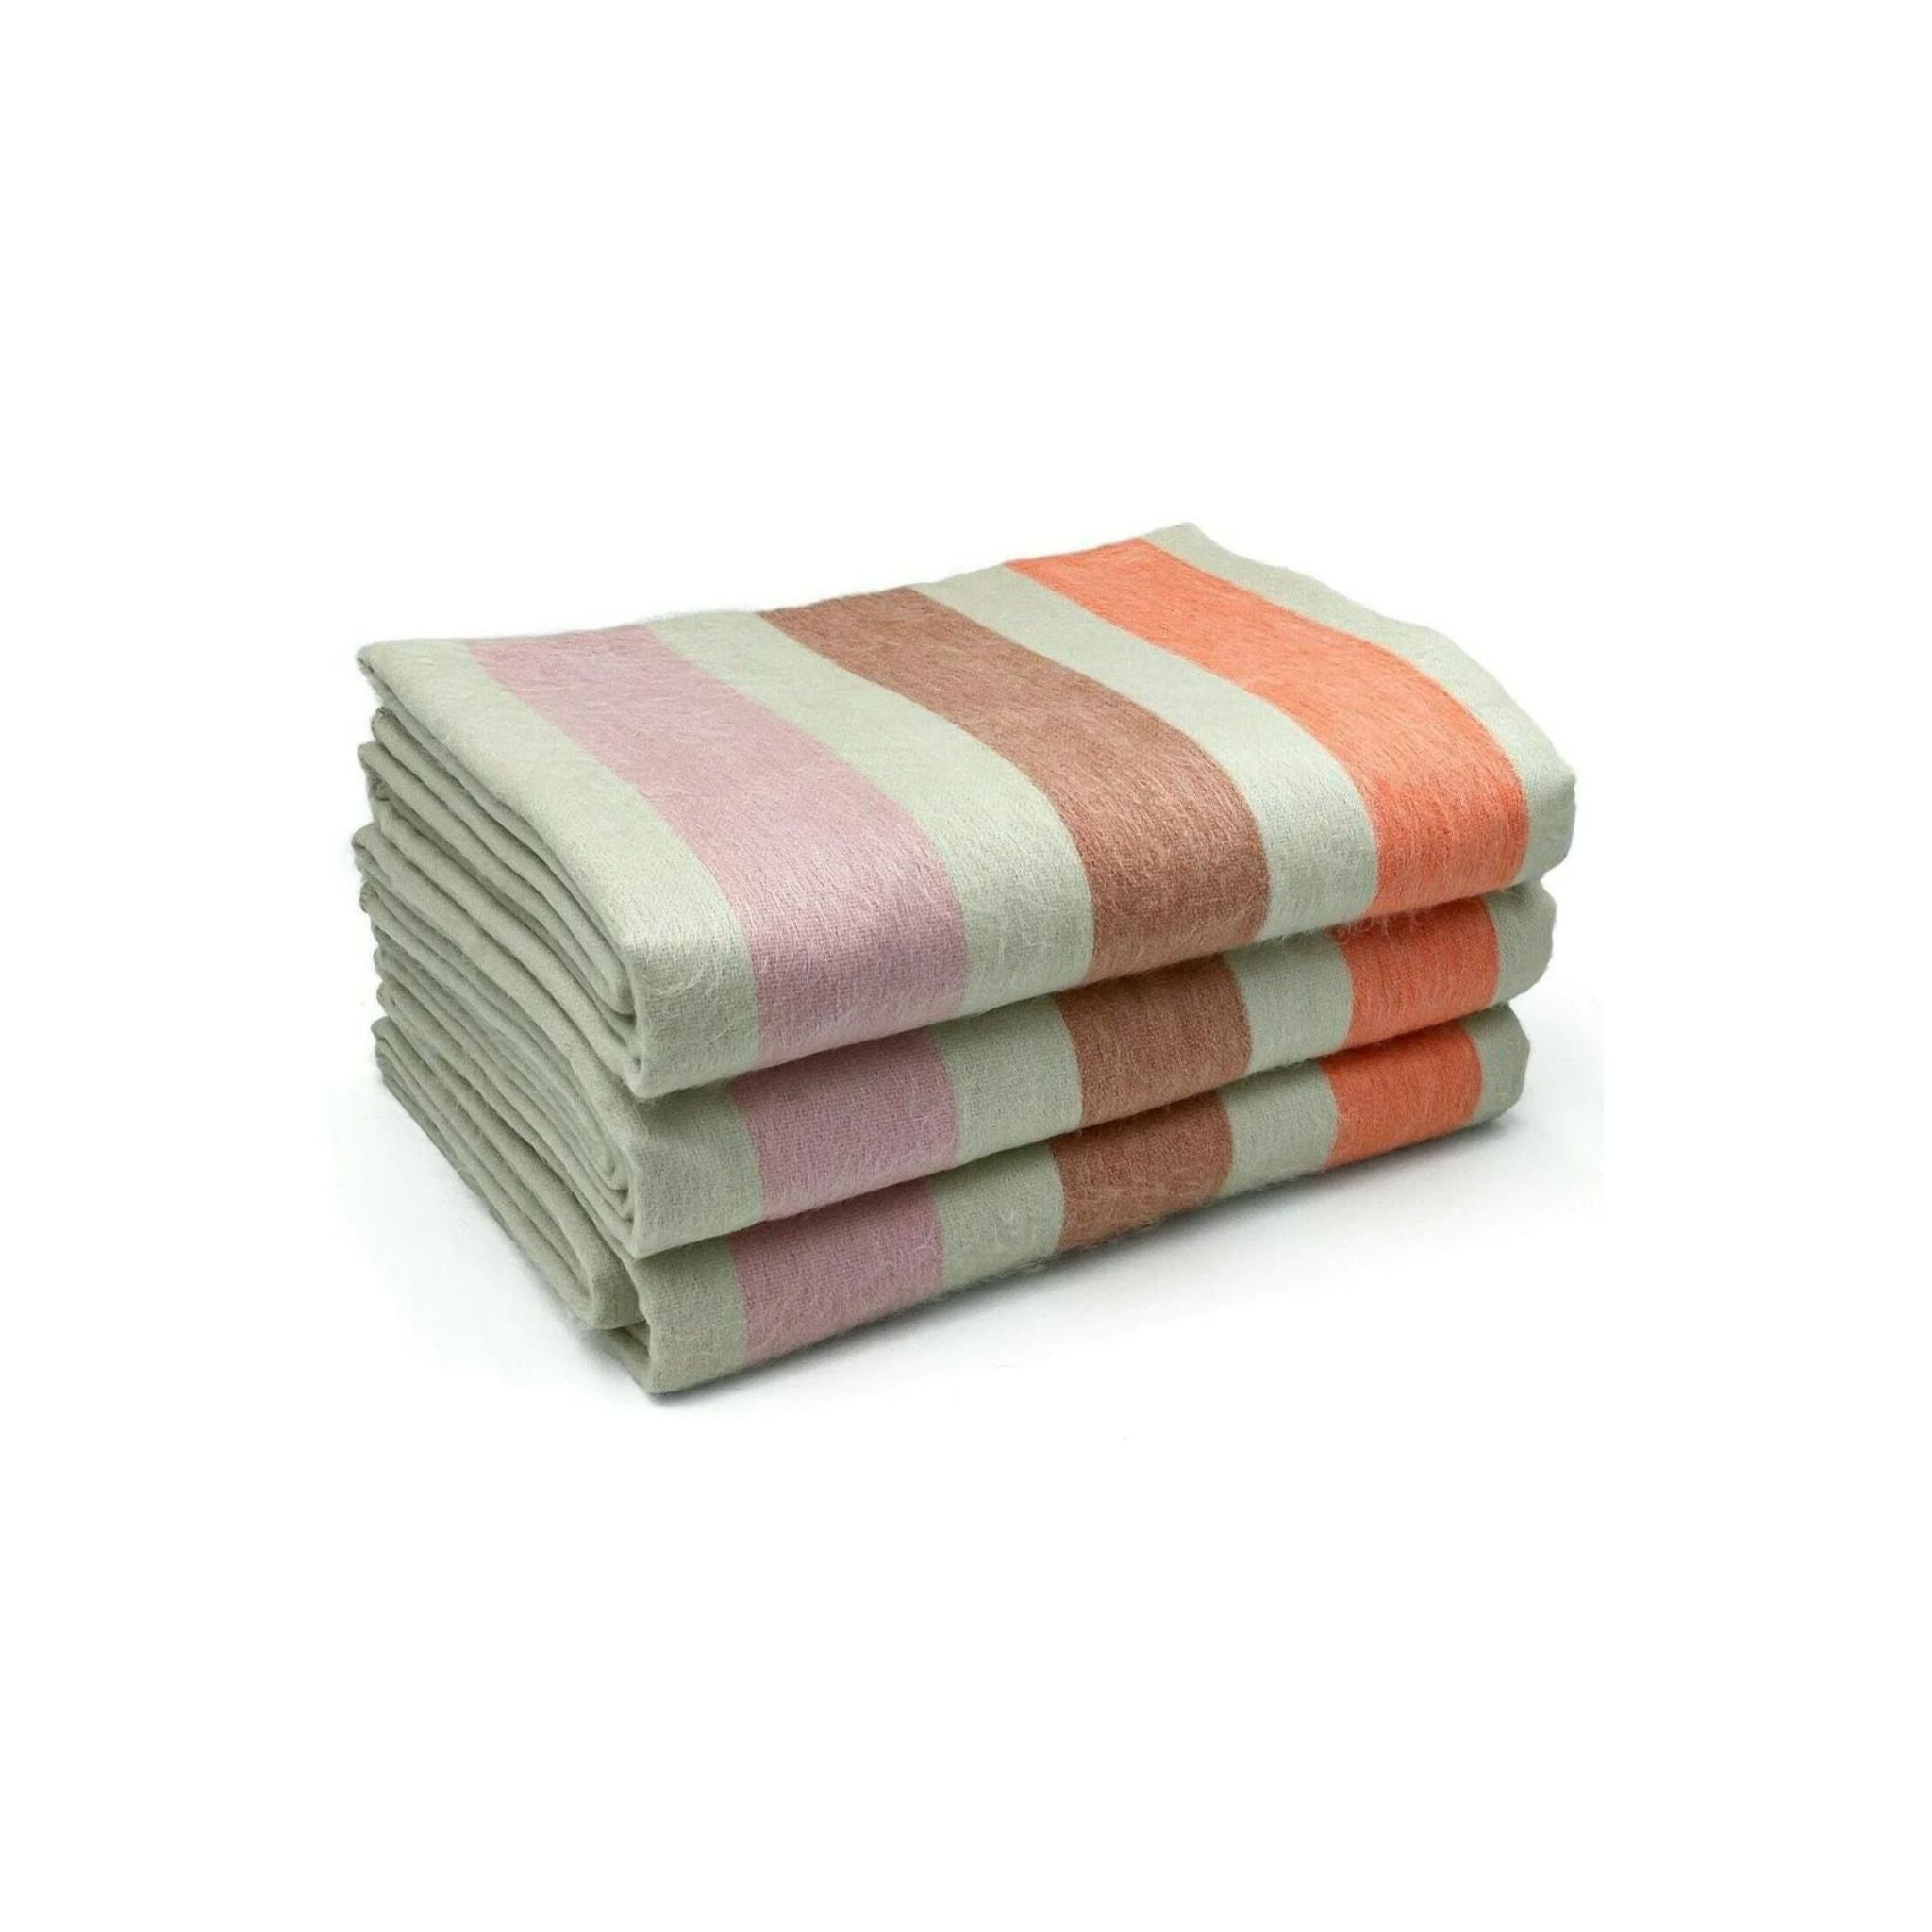 ANNA - THROW BLANKET - Simply Elevated Home Furnishings 